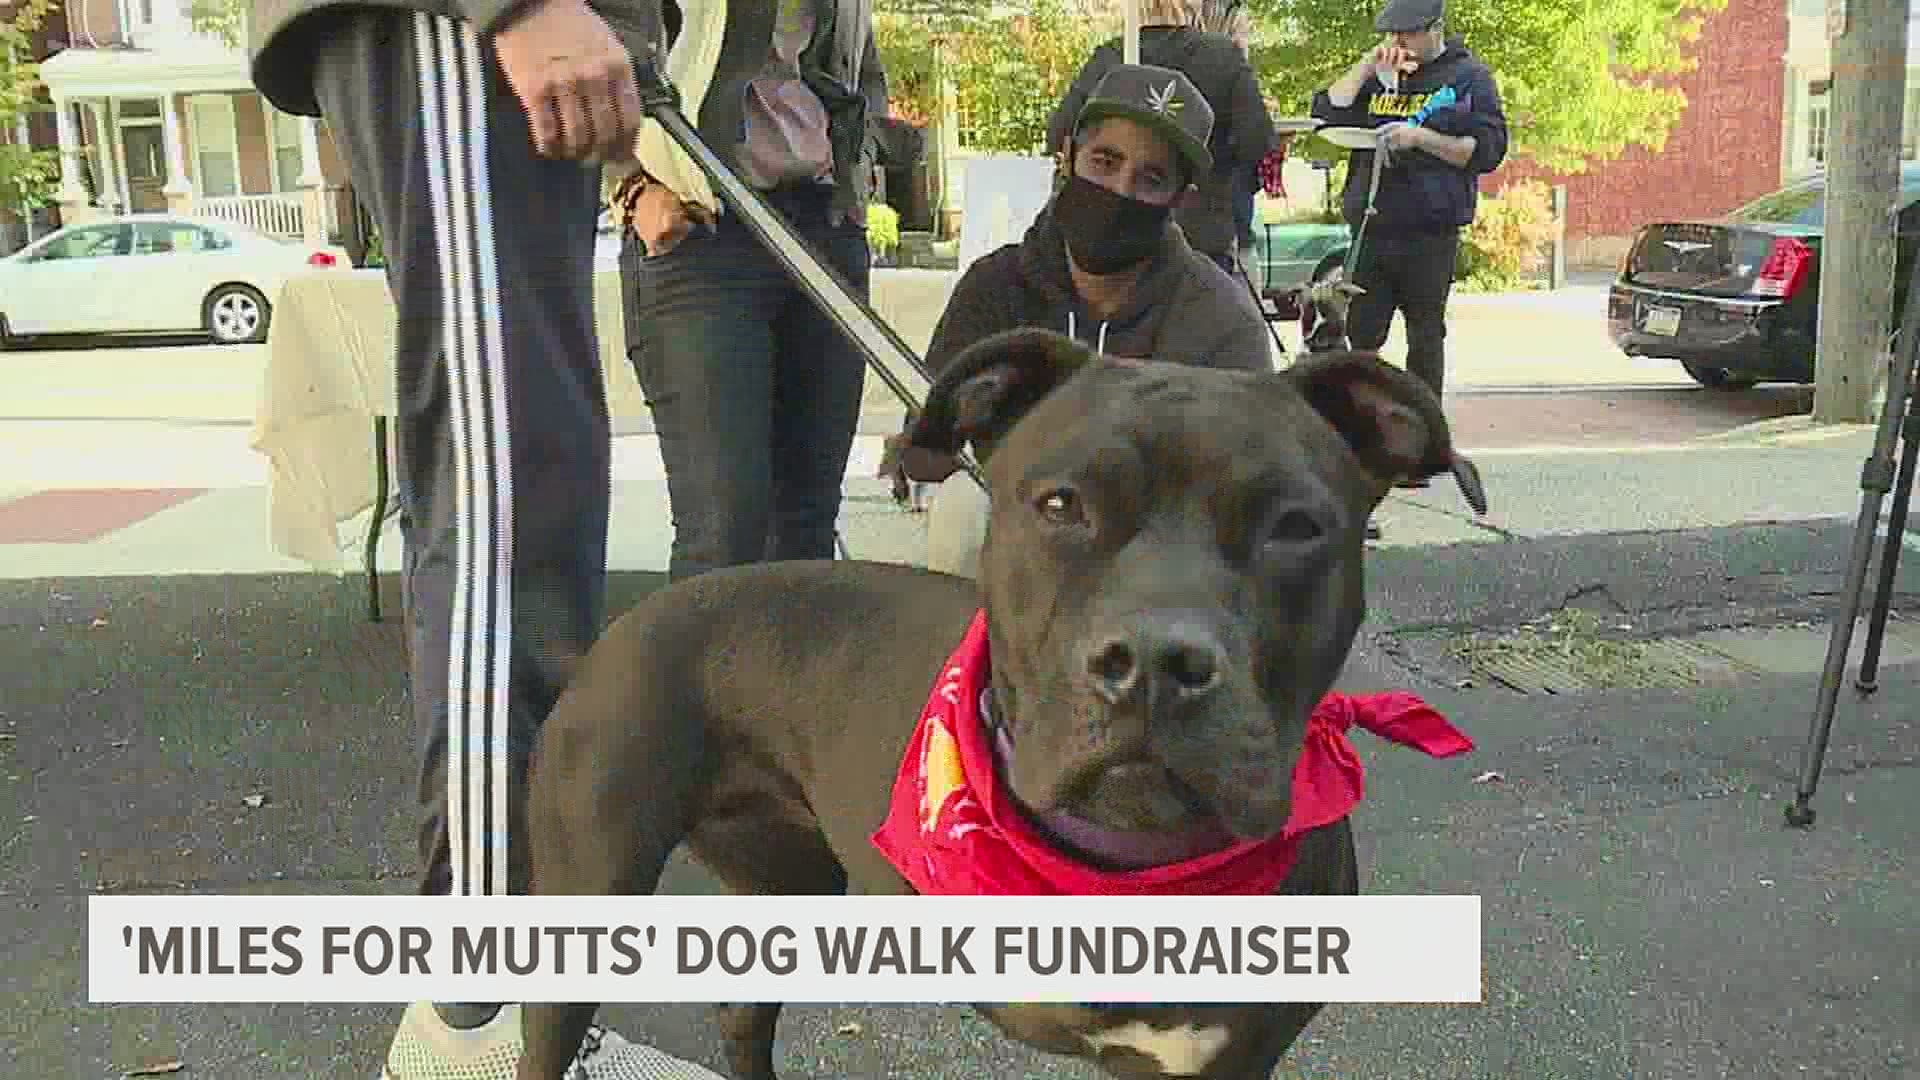 Dozens joined in on the one mile stroll which raised money to help animals in need of emergency care.